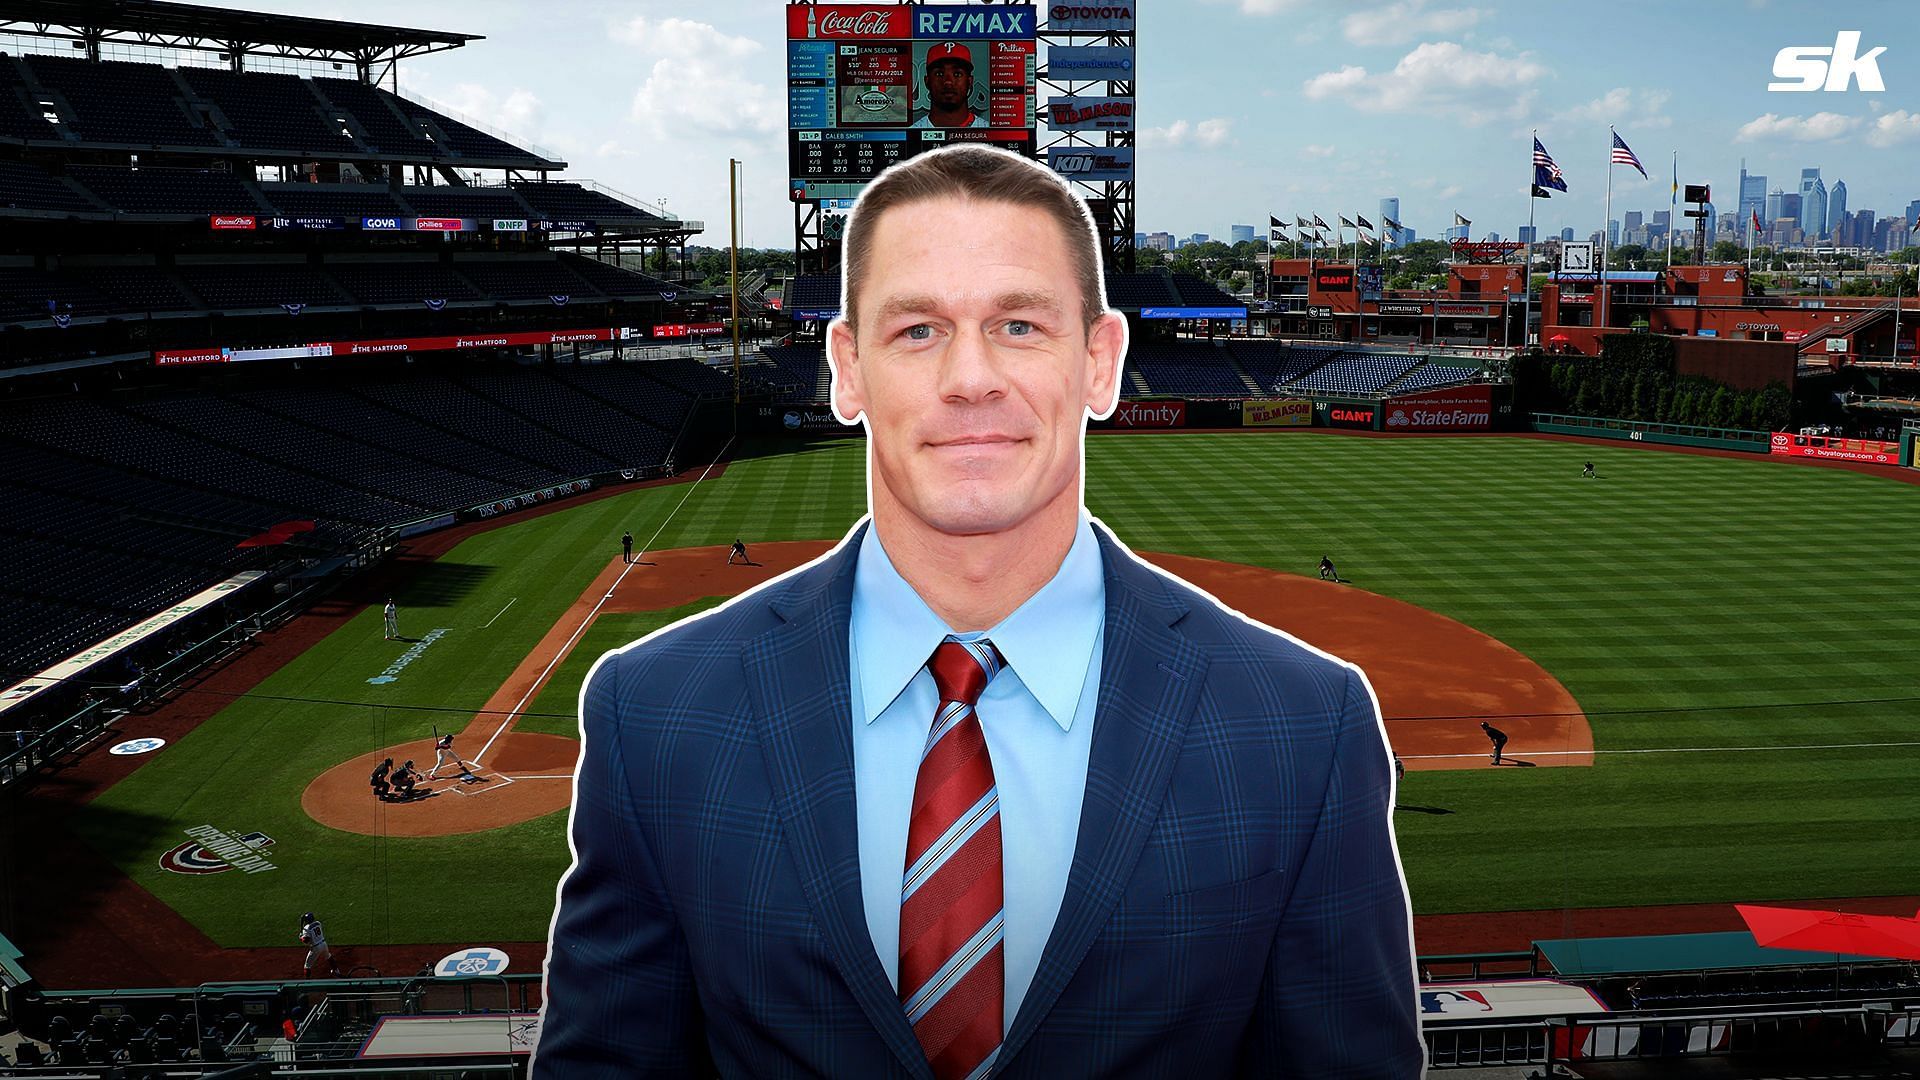 WWE legend John Cena channels baseball knowledge to compare his wrestling career graph